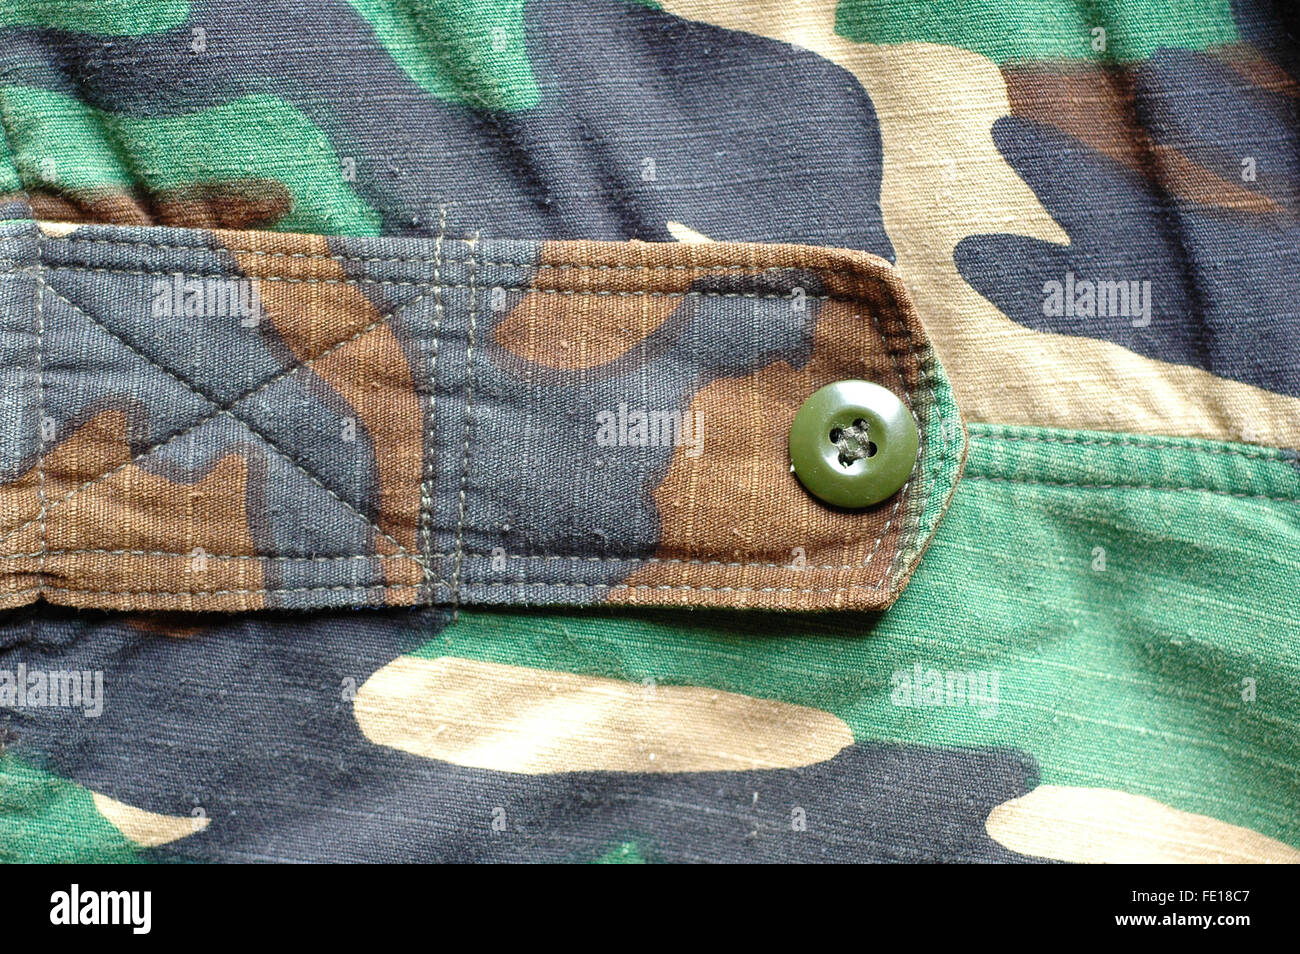 army style fabric Stock Photo